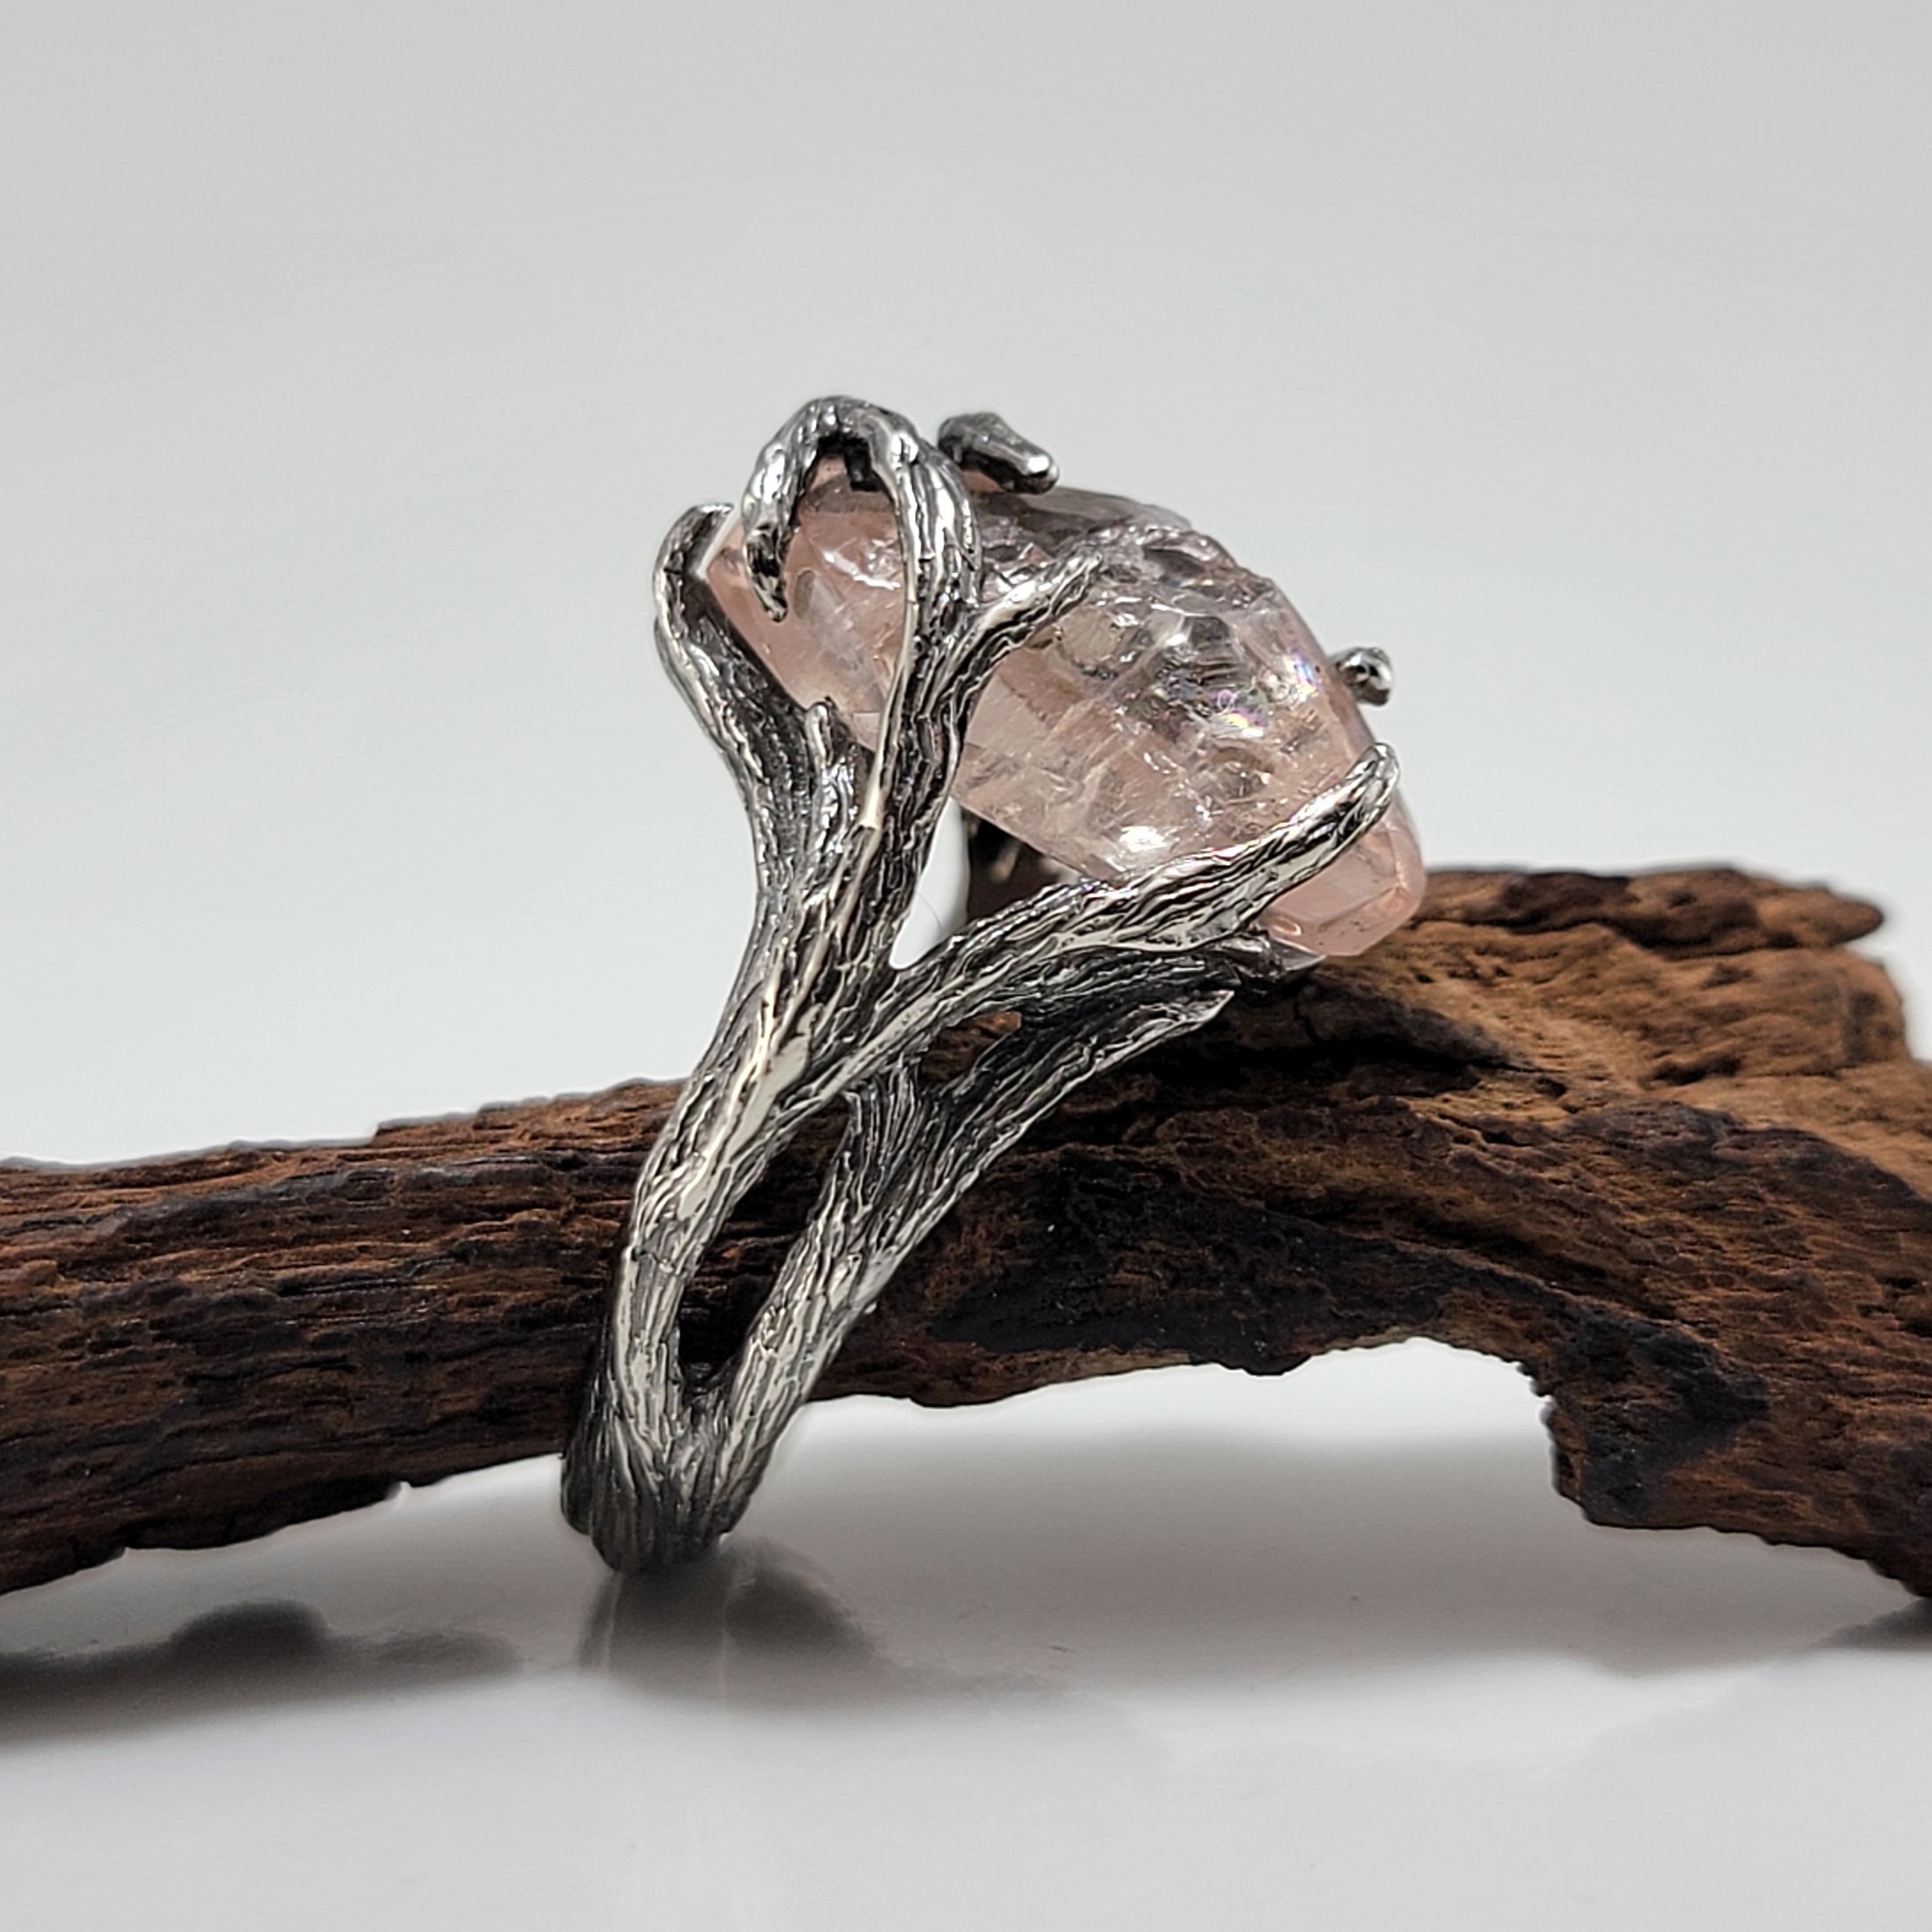 Dawn Vertrees Raw Uncut Rough Engagement Wedding Rings: Raw Three Diamond  Twig Leaf Engagement Ring, Raw Uncut White Diamond Branch Solitaire, Custom  Made-to-Order, Hand Sculpted Gold Wedding Ring